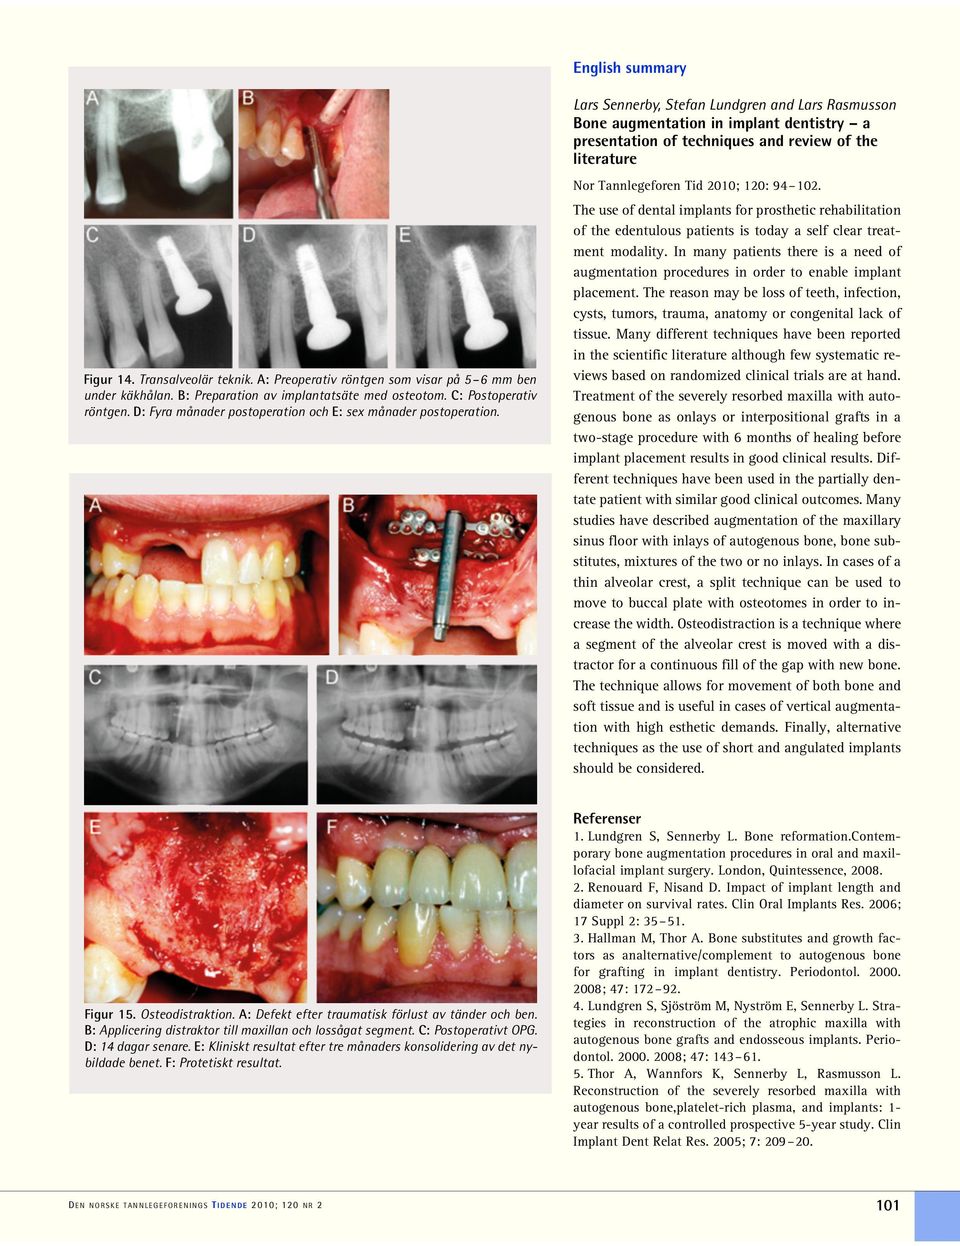 Lars Sennerby, Stefan Lundgren and Lars Rasmusson Bone augmentation in implant dentistry a presentation of techniques and review of the literature Nor Tannlegeforen Tid 2010; 120: 94 102.